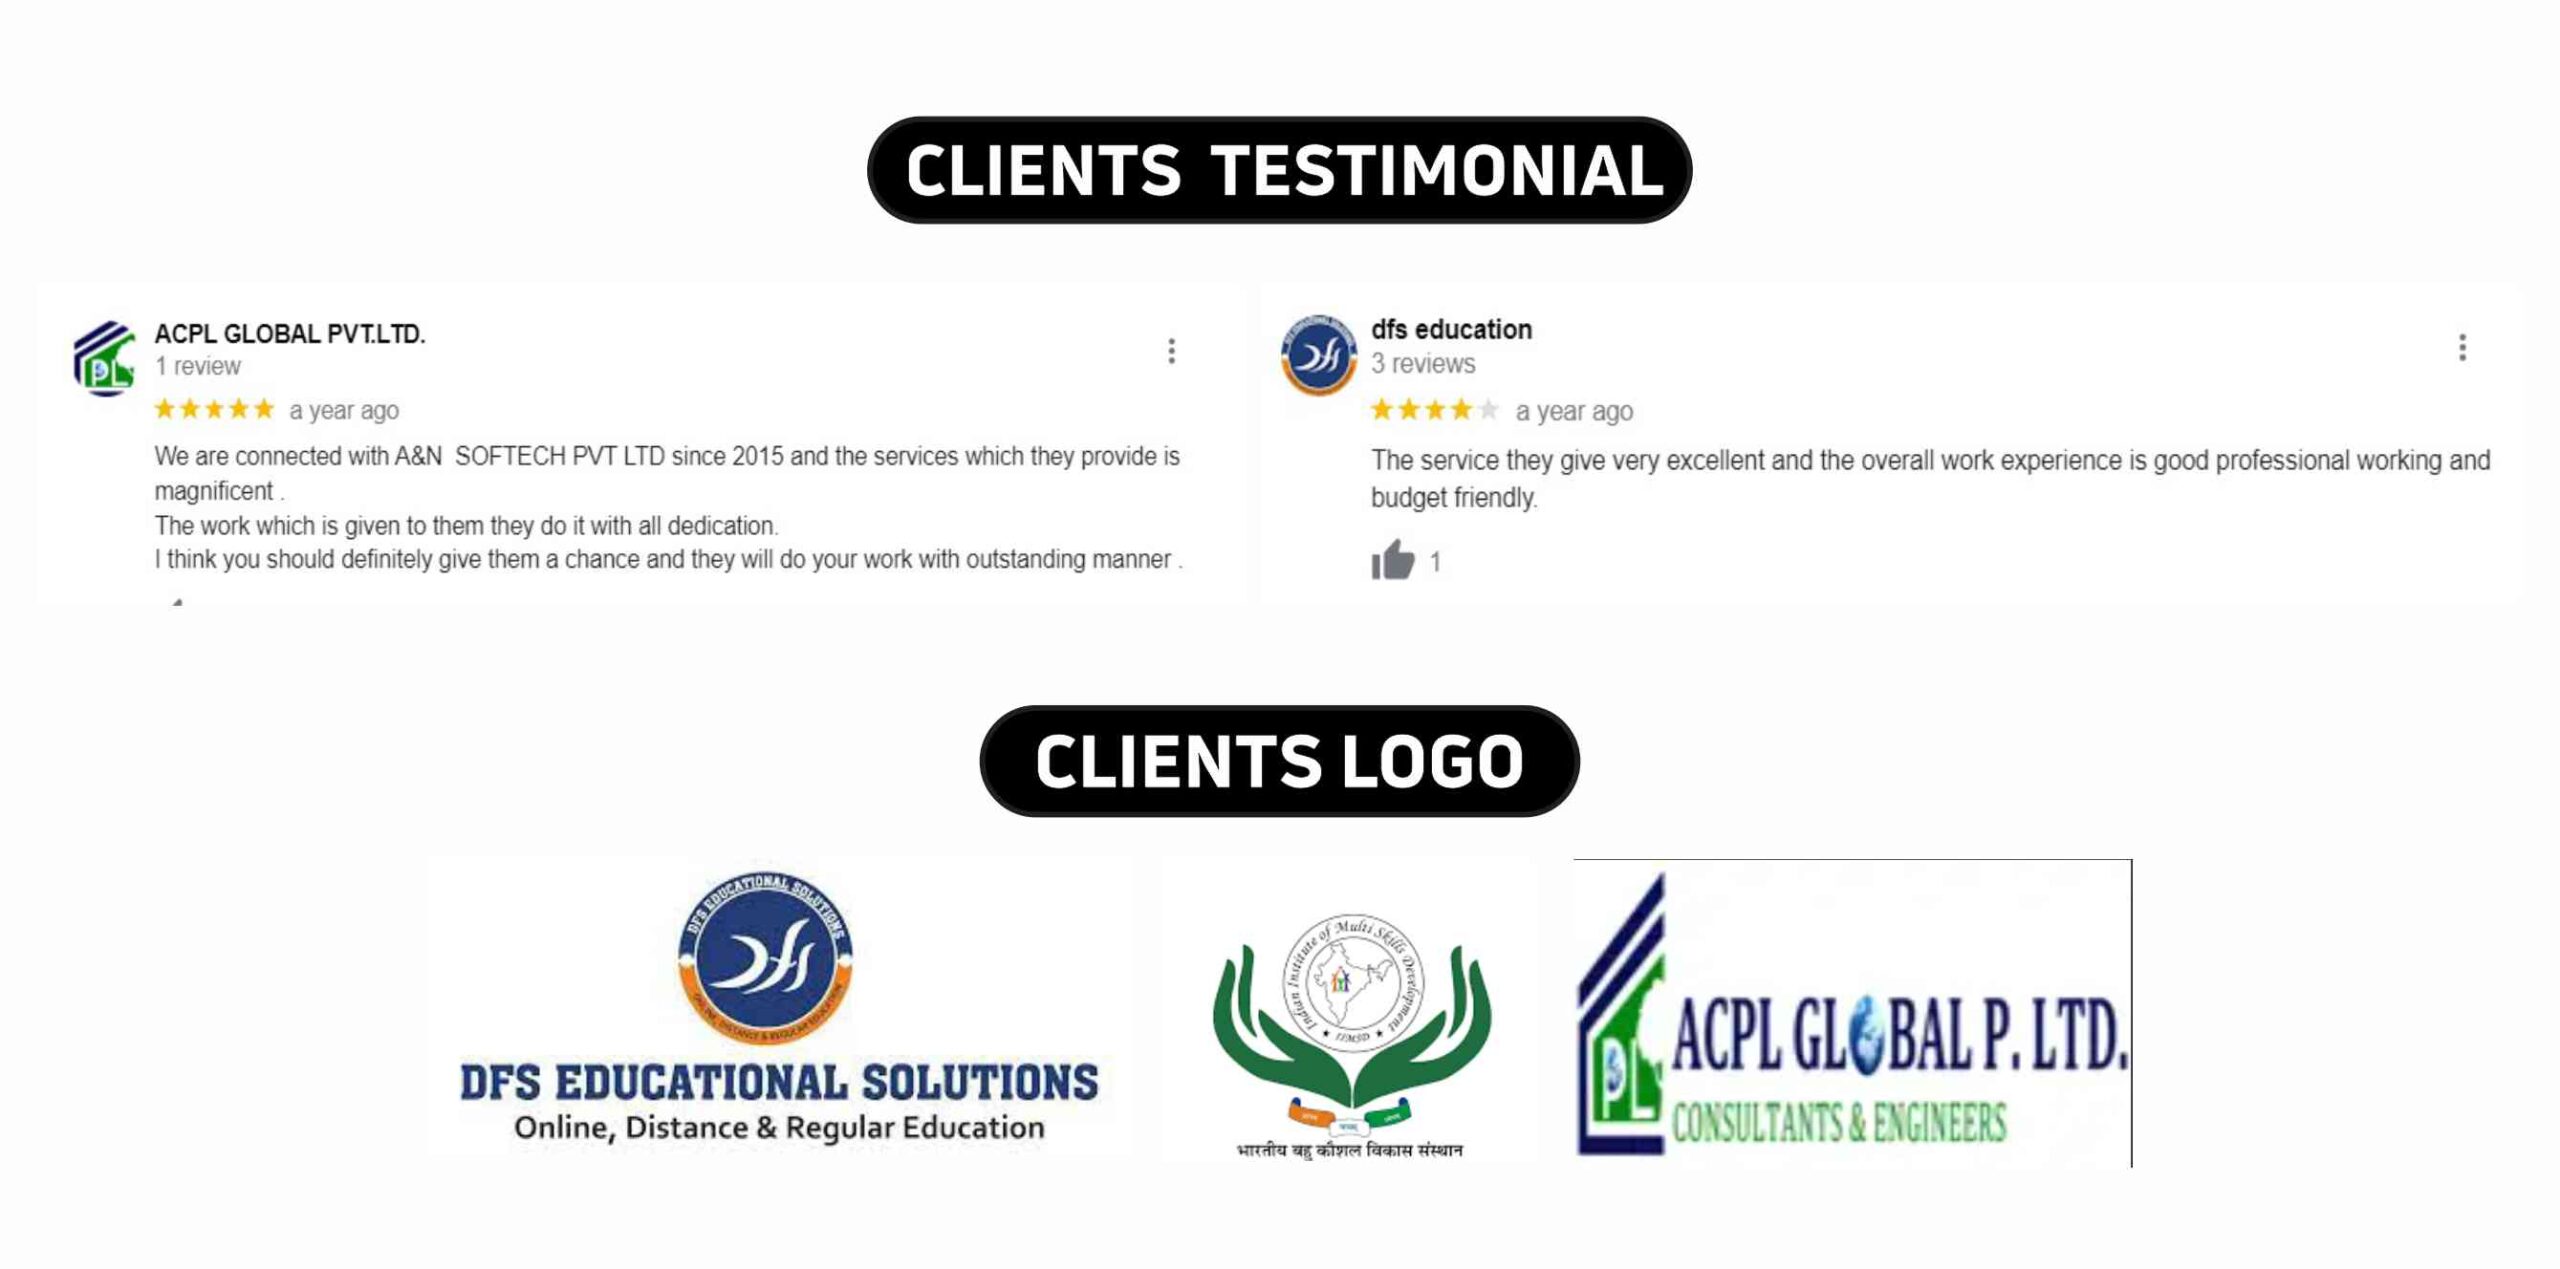 A&N Softech (P) Ltd Services Private Limited Clients Testimonials & Logos